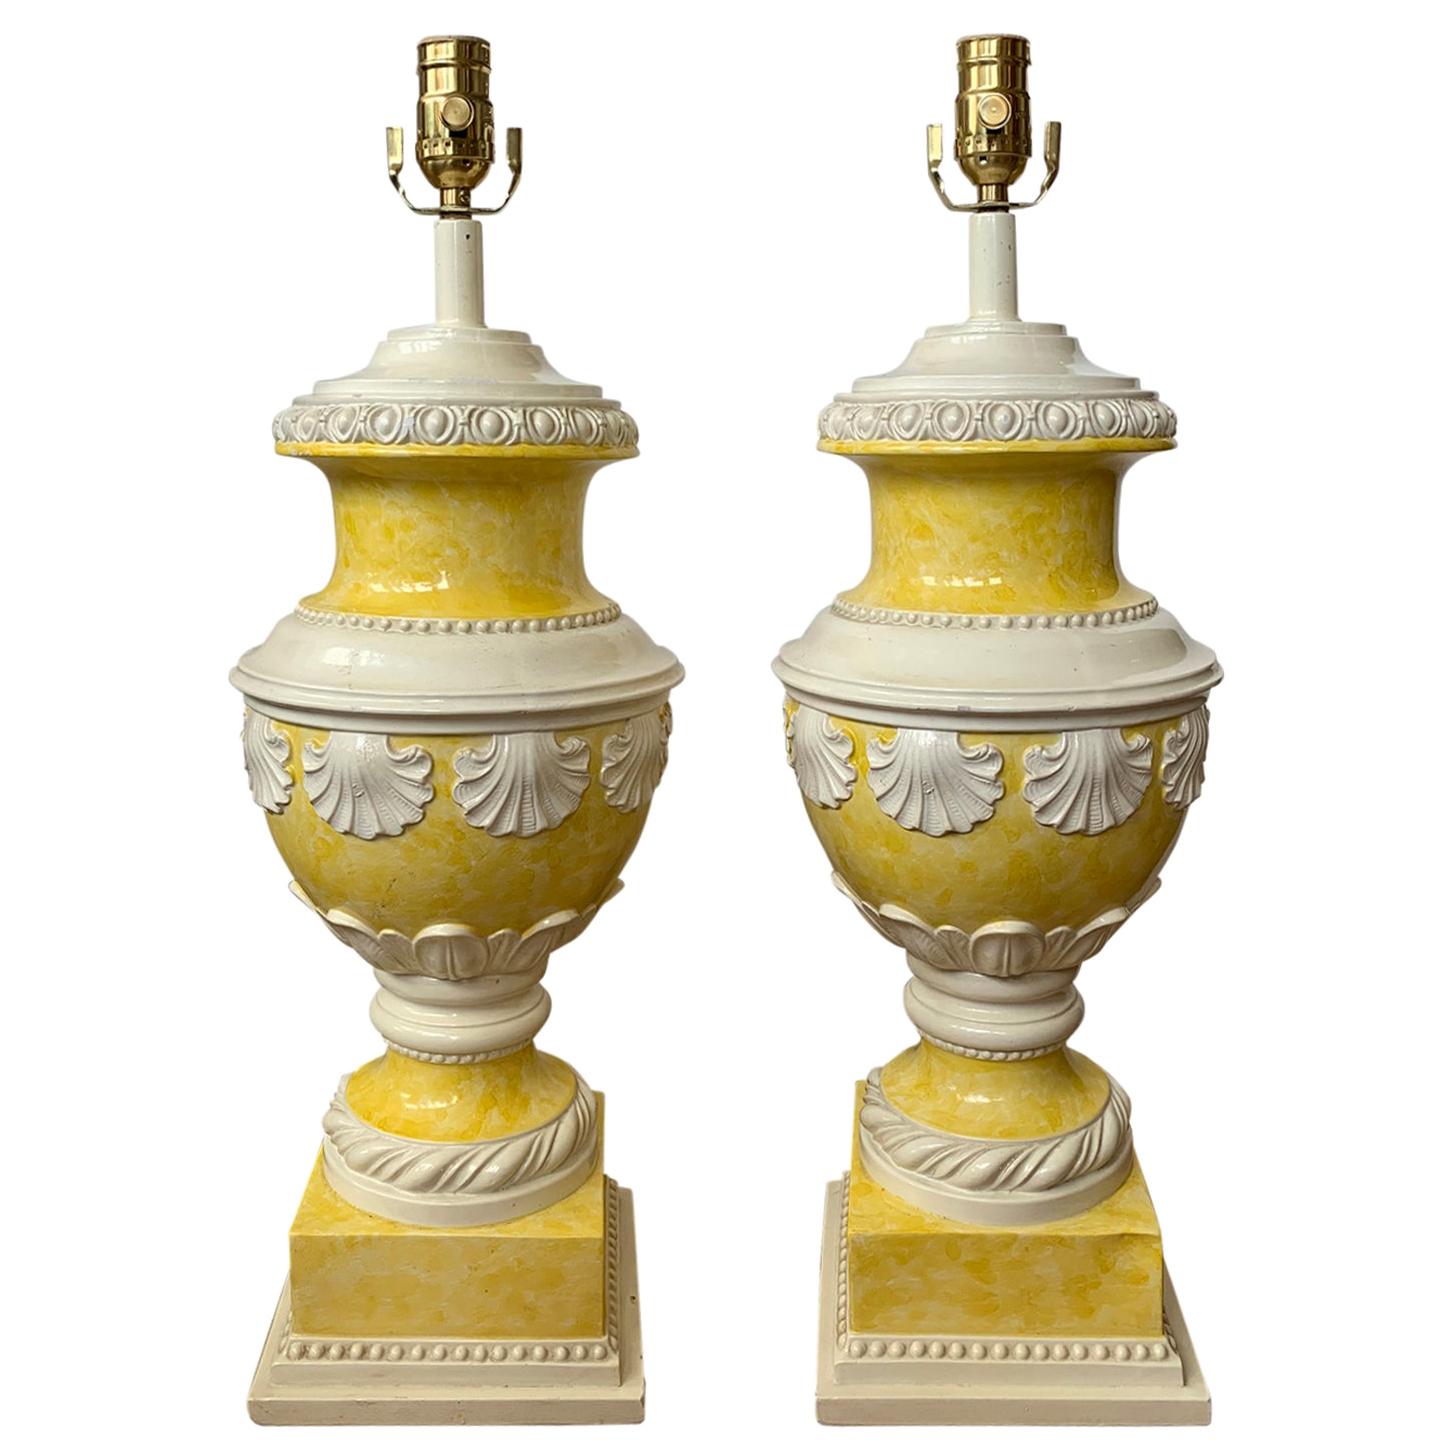 Mid-20th Century Neoclassical Yellow & White Glazed Urn Lamps, Shell Motif, Pair